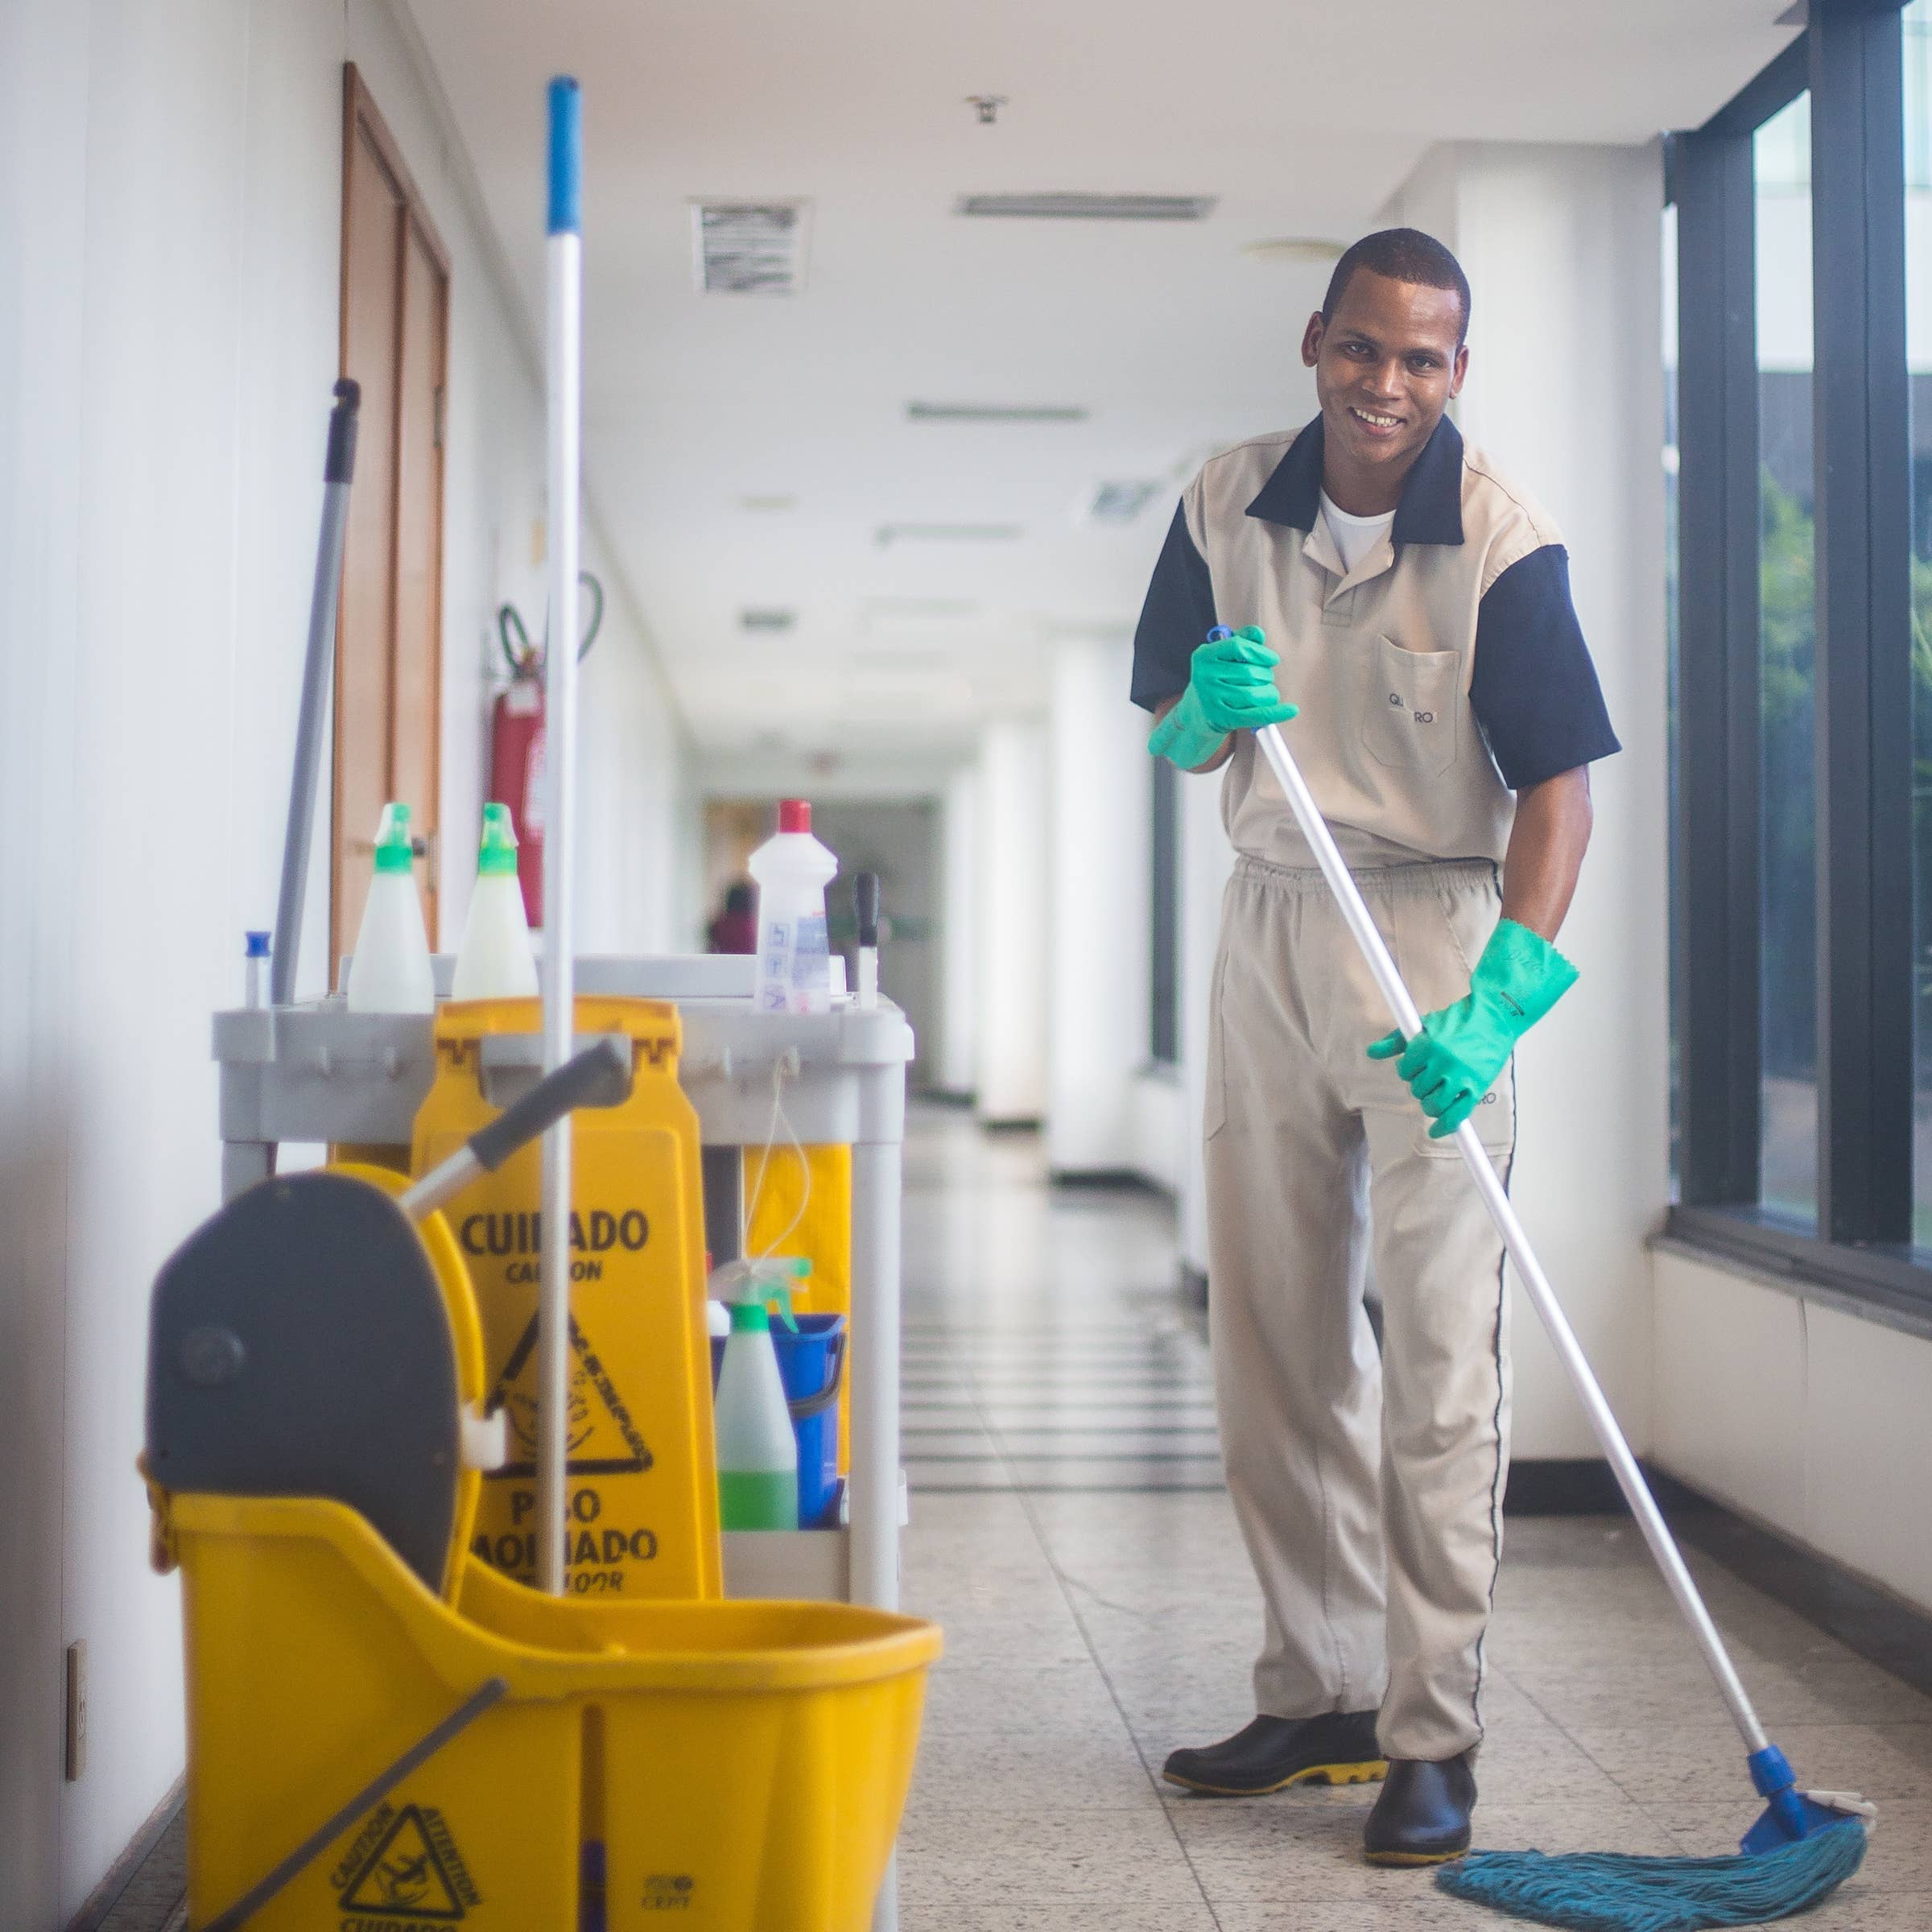 janitor-interview-questions-3210x4815-20201211.jpeg